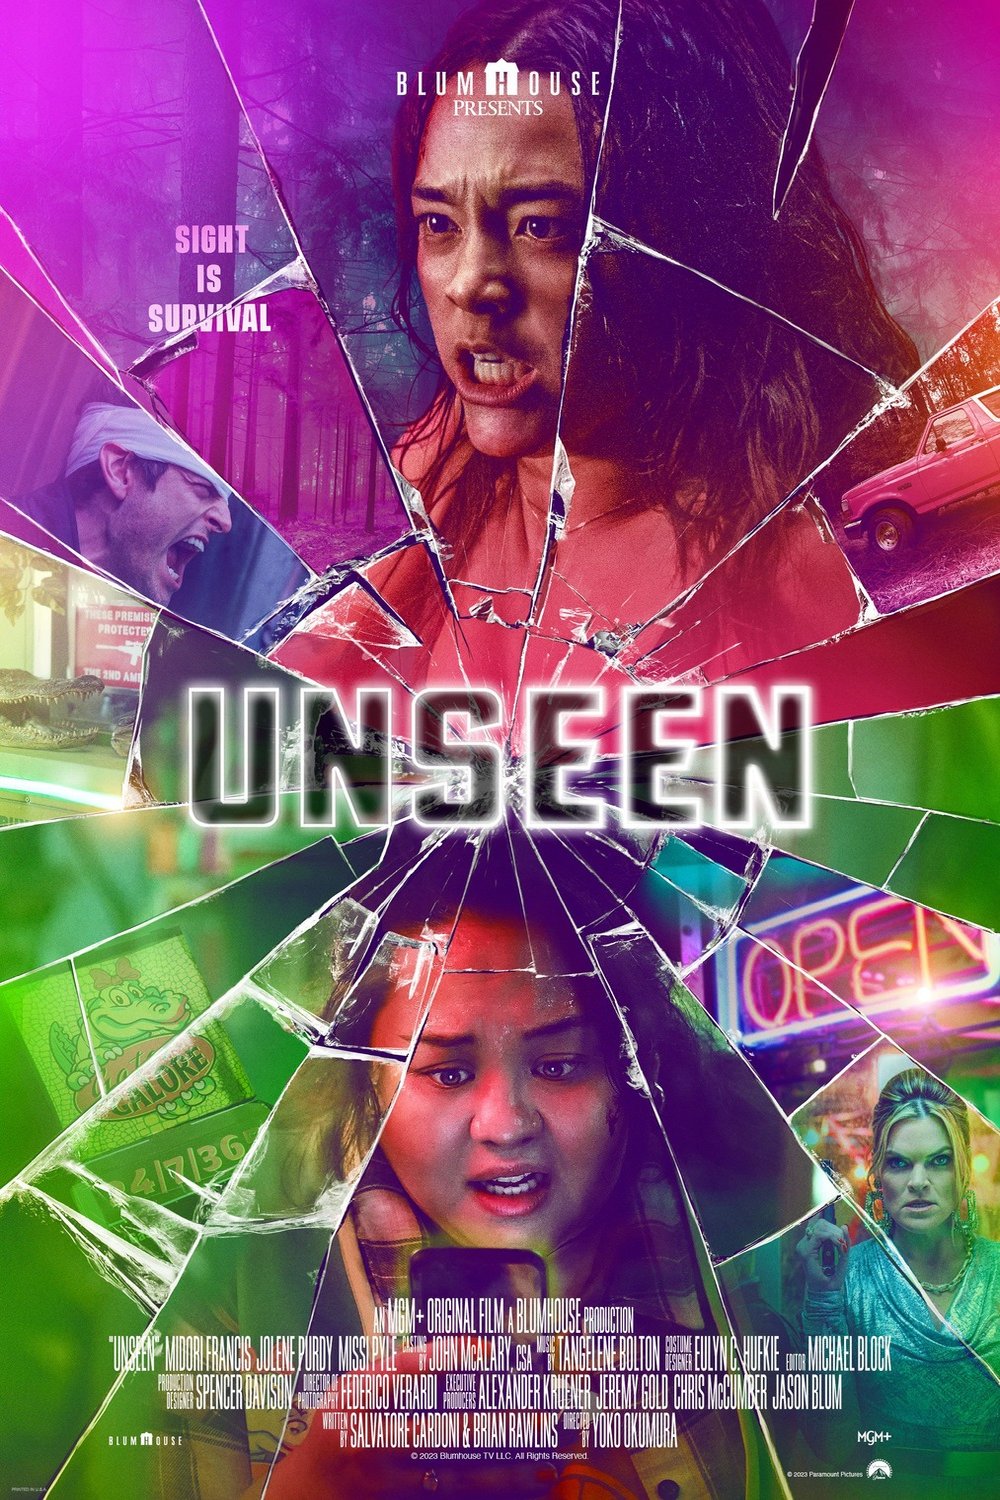 Poster of the movie Unseen